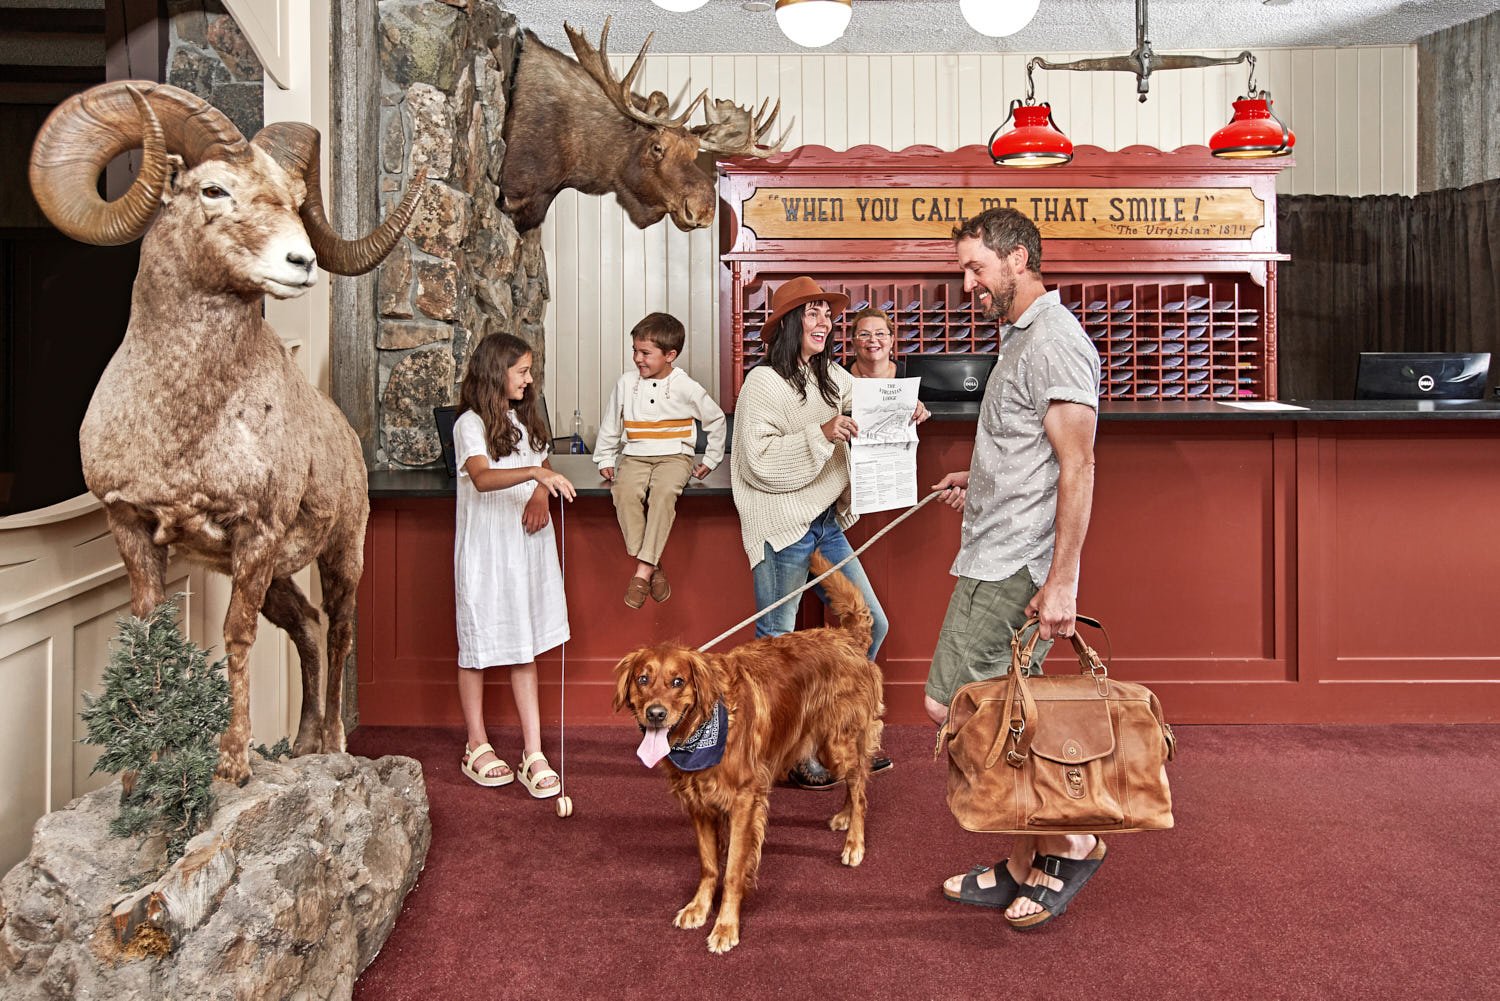 Knoxy_Knox_Lifestyle Photographer_Outbound Hotels_Summer_Mixed Race Family_Hotel_Lobby_Pet_Friendly_Check In_0074.jpg